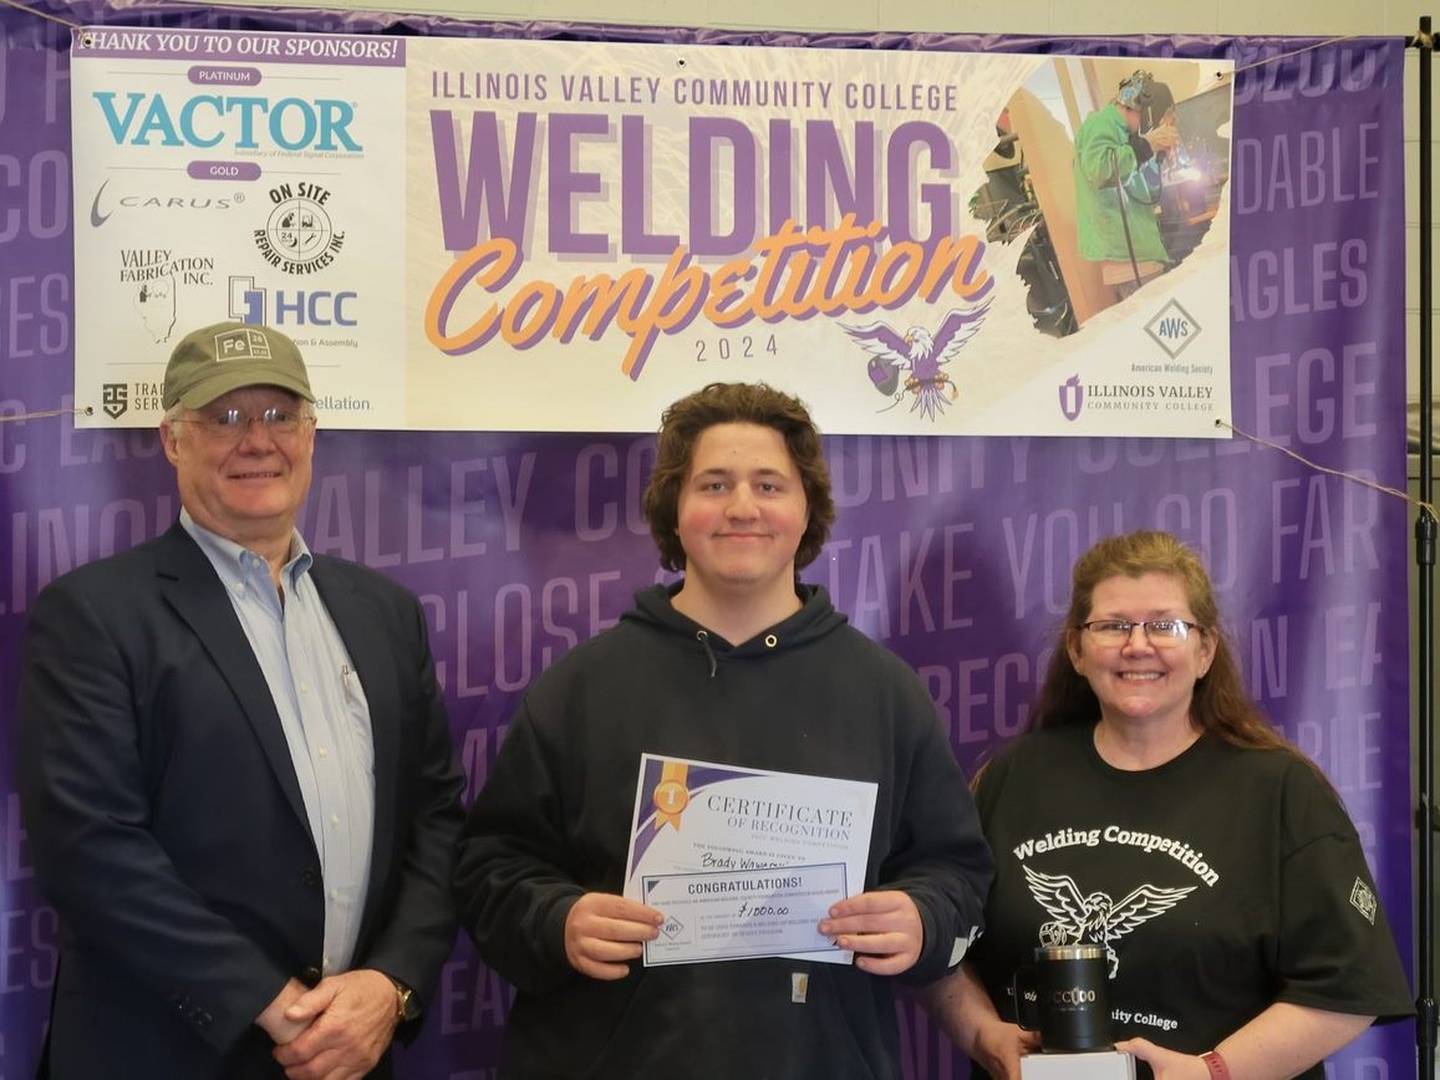 Brady Wawerski, Ottawa, earned first place and prizes in the college SMA welding division at the IVCC-AWS annual welding competition. He is pictured with Theresa Molln (right) and Ron Ashelford